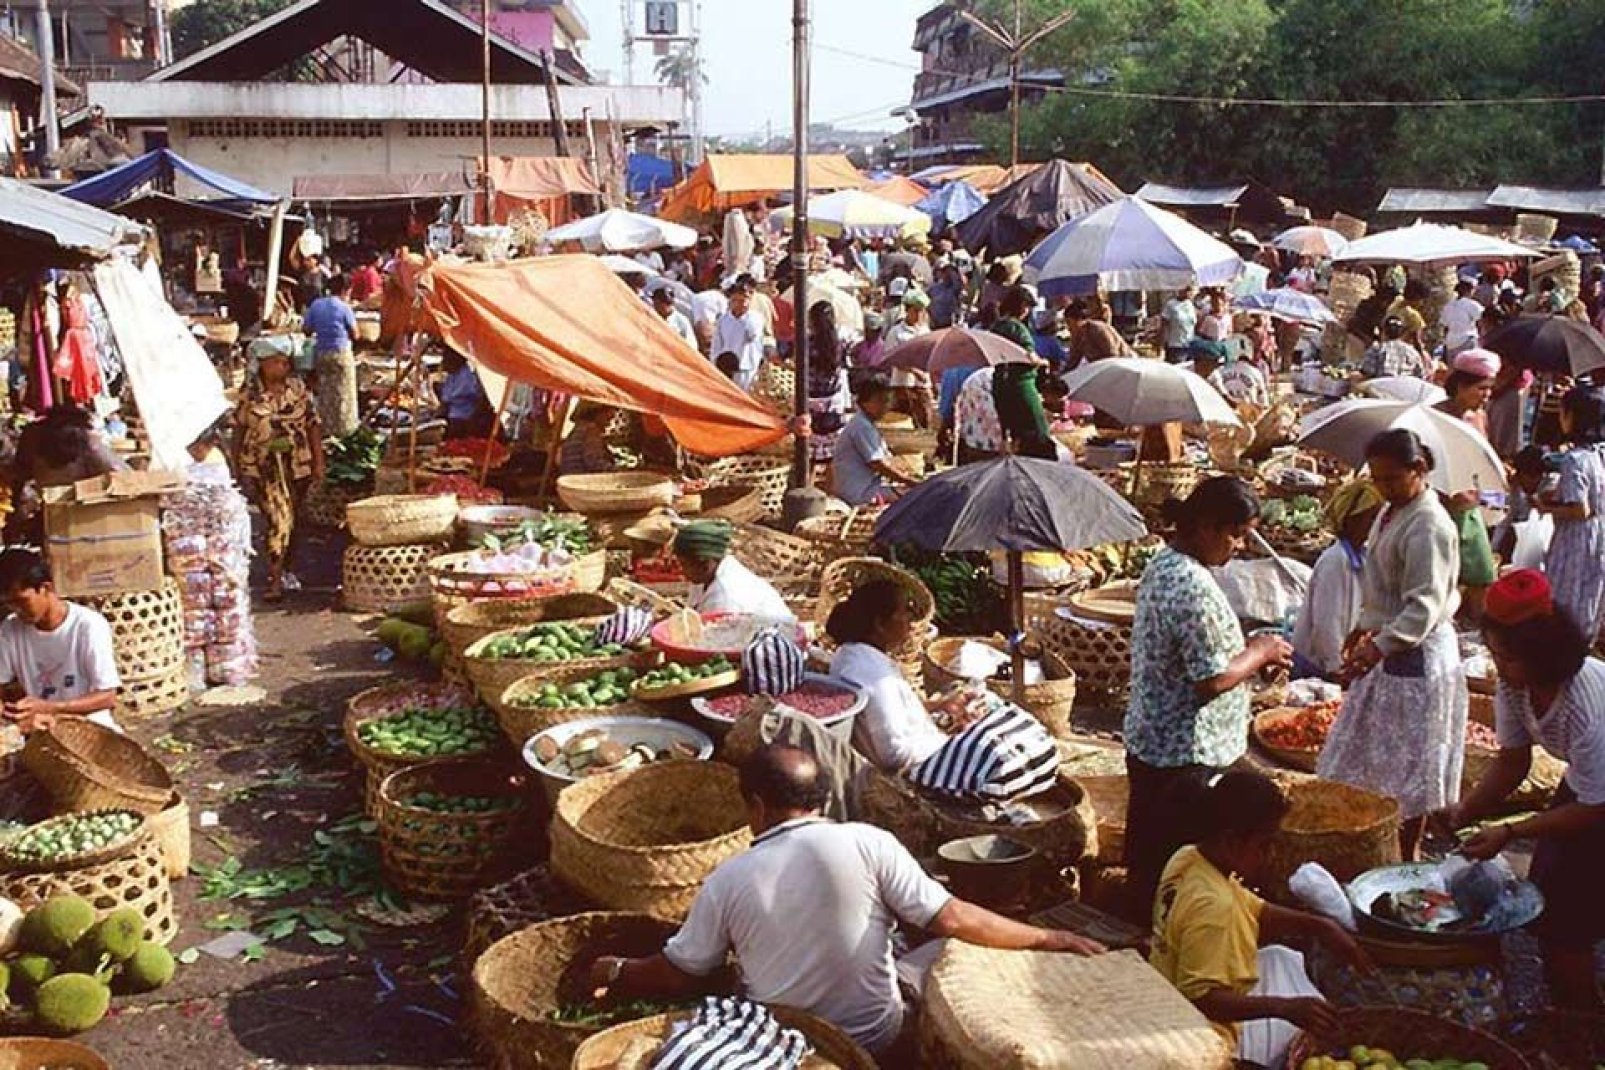 With everything from Batik products to wicker furniture and sculptures for sale, the pasar is a major part of local life.